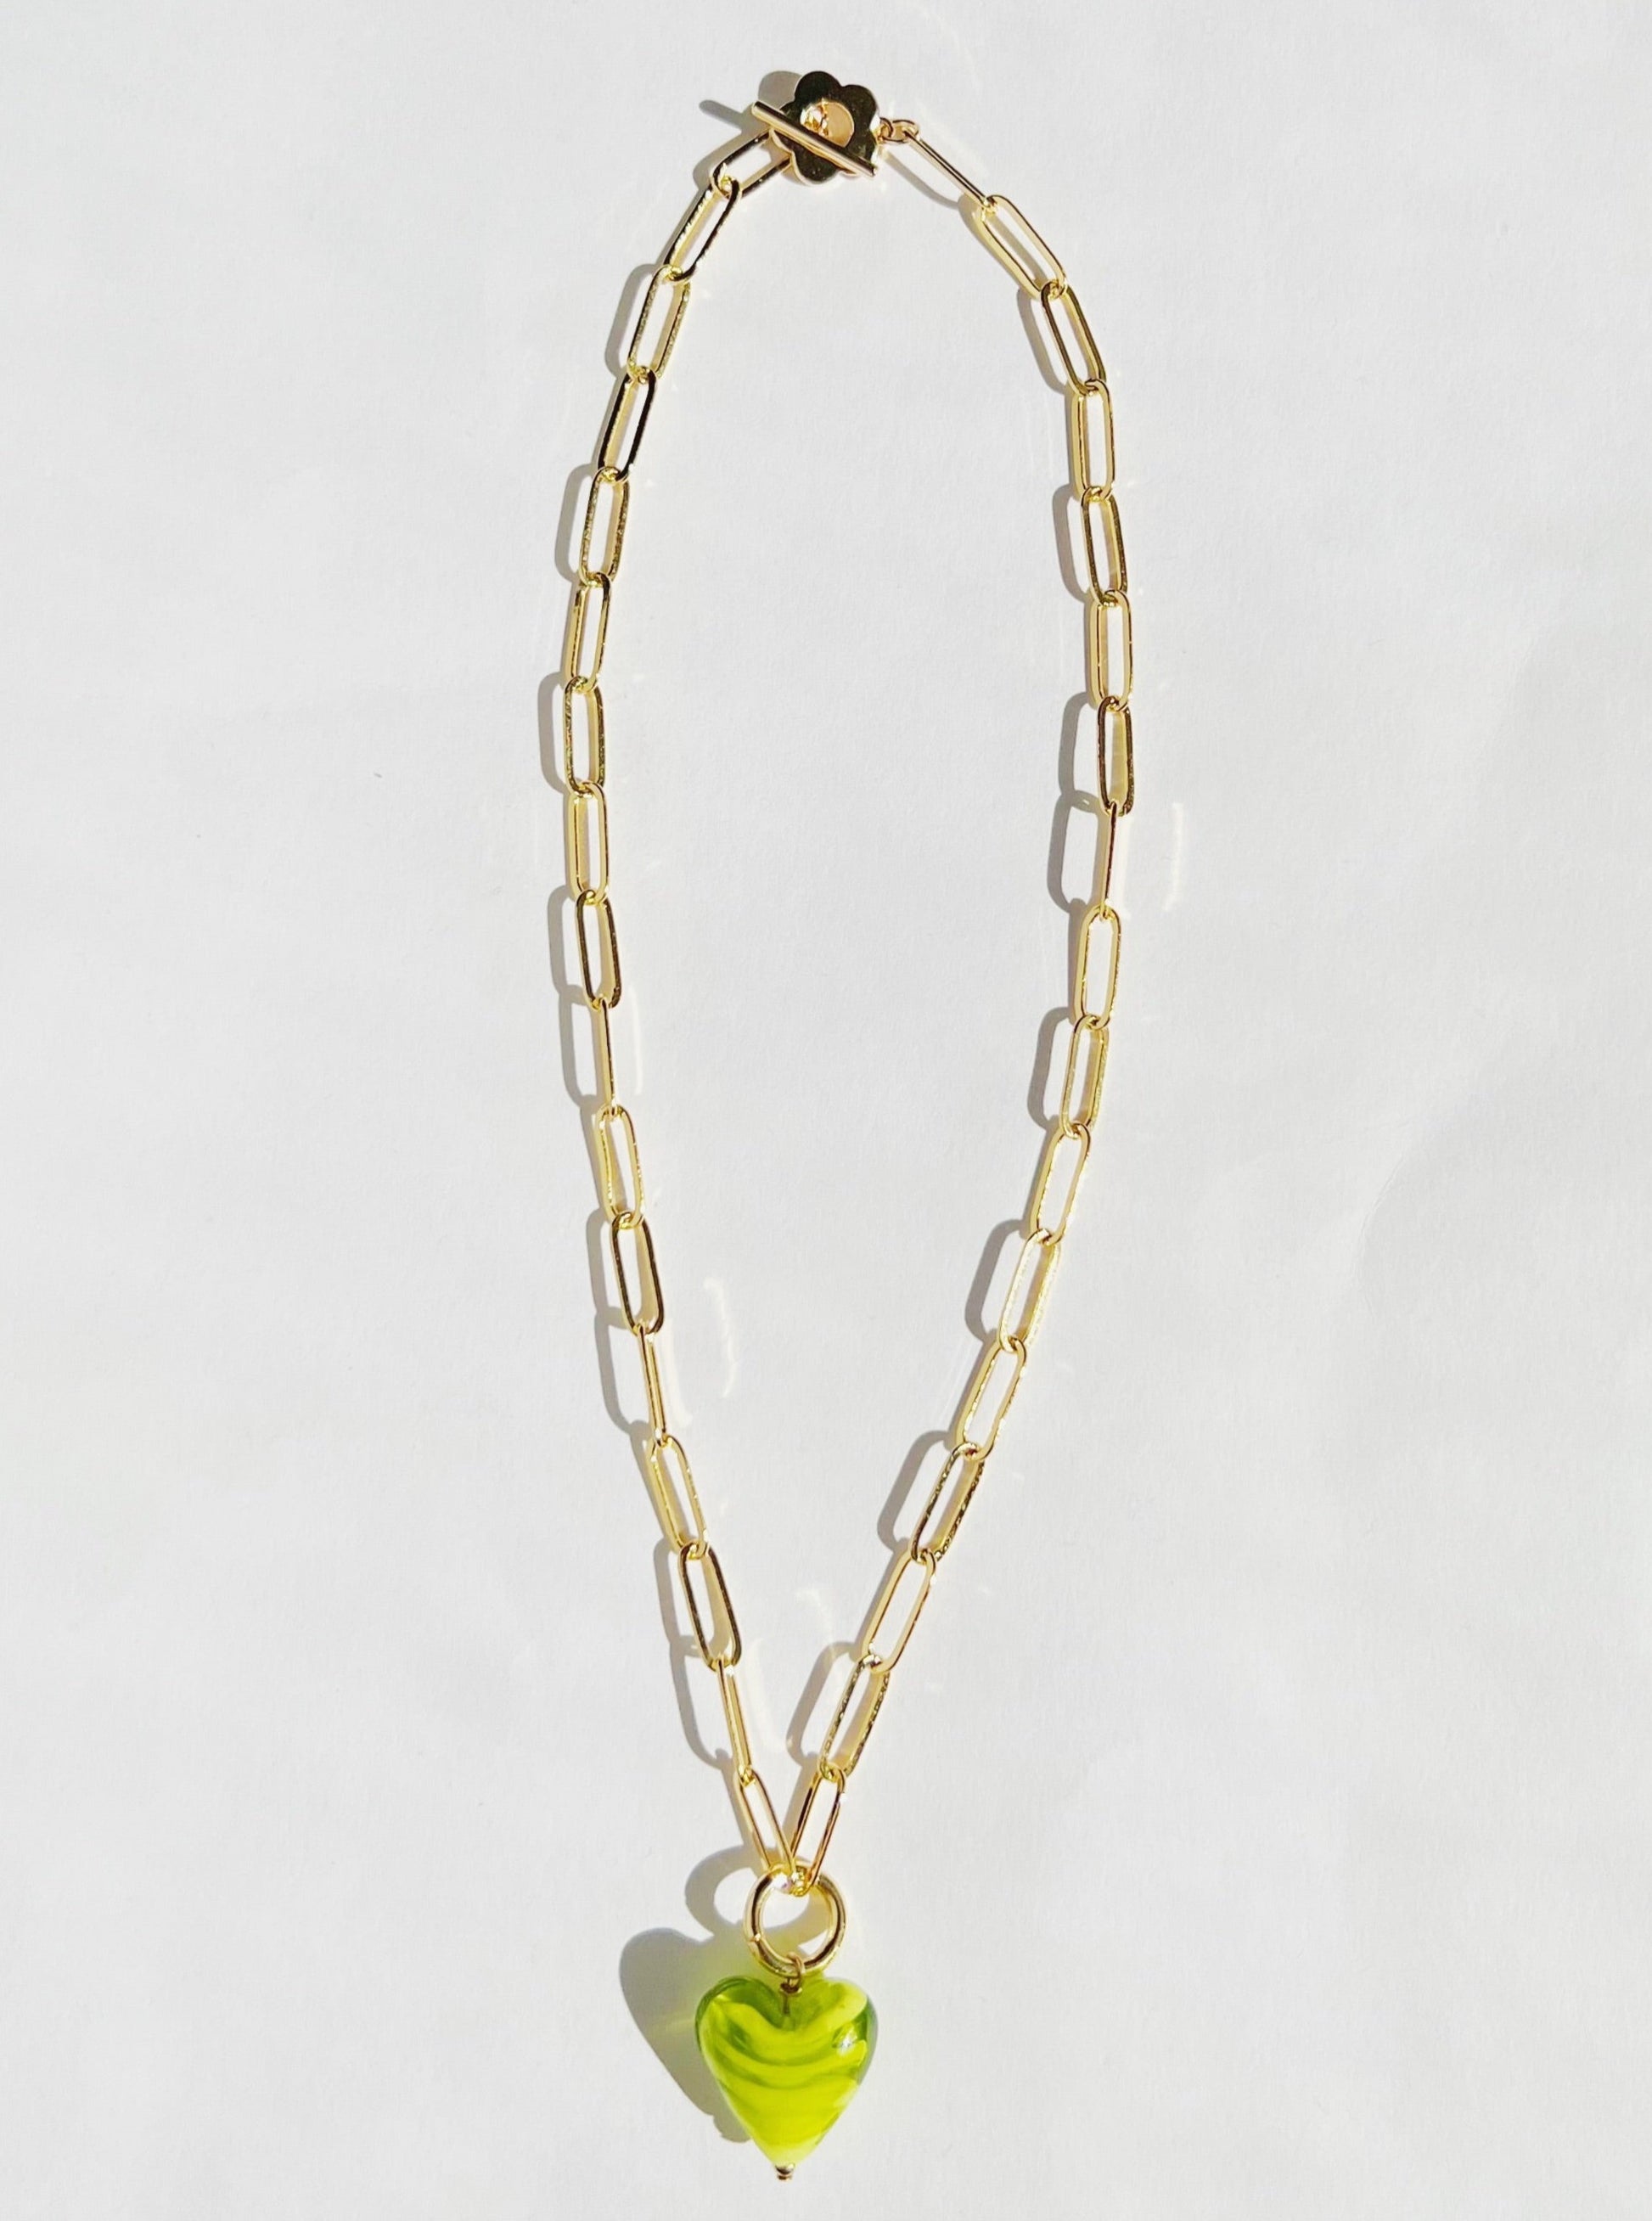 A flat lay picture of a green heart gold paper clip statement necklace on a white background. The statement necklace consist of a glass bead with a green and white spiral color shaped into a heart on a gold paper clip chain with a flower closure.